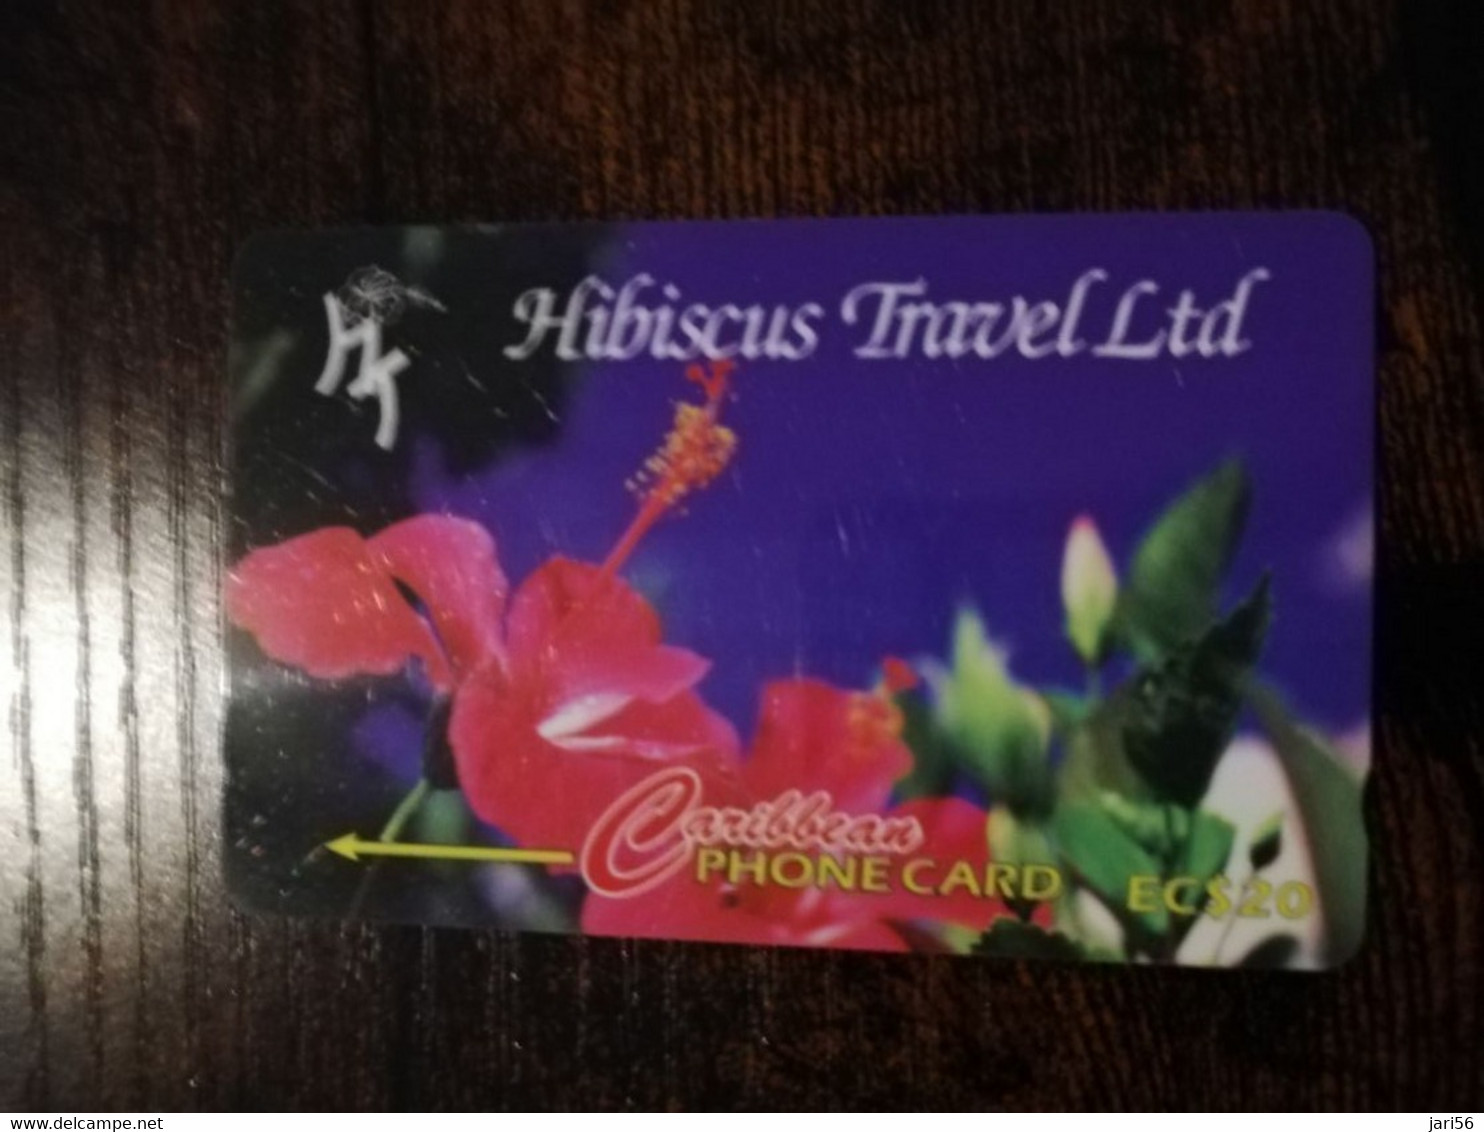 ST LUCIA    $ 20,-    CABLE & WIRELESS  STL-14AF  147CSLA  HIBISCUS TRAVEL LTD 1997       Fine Used Card ** 6876** - Sainte Lucie